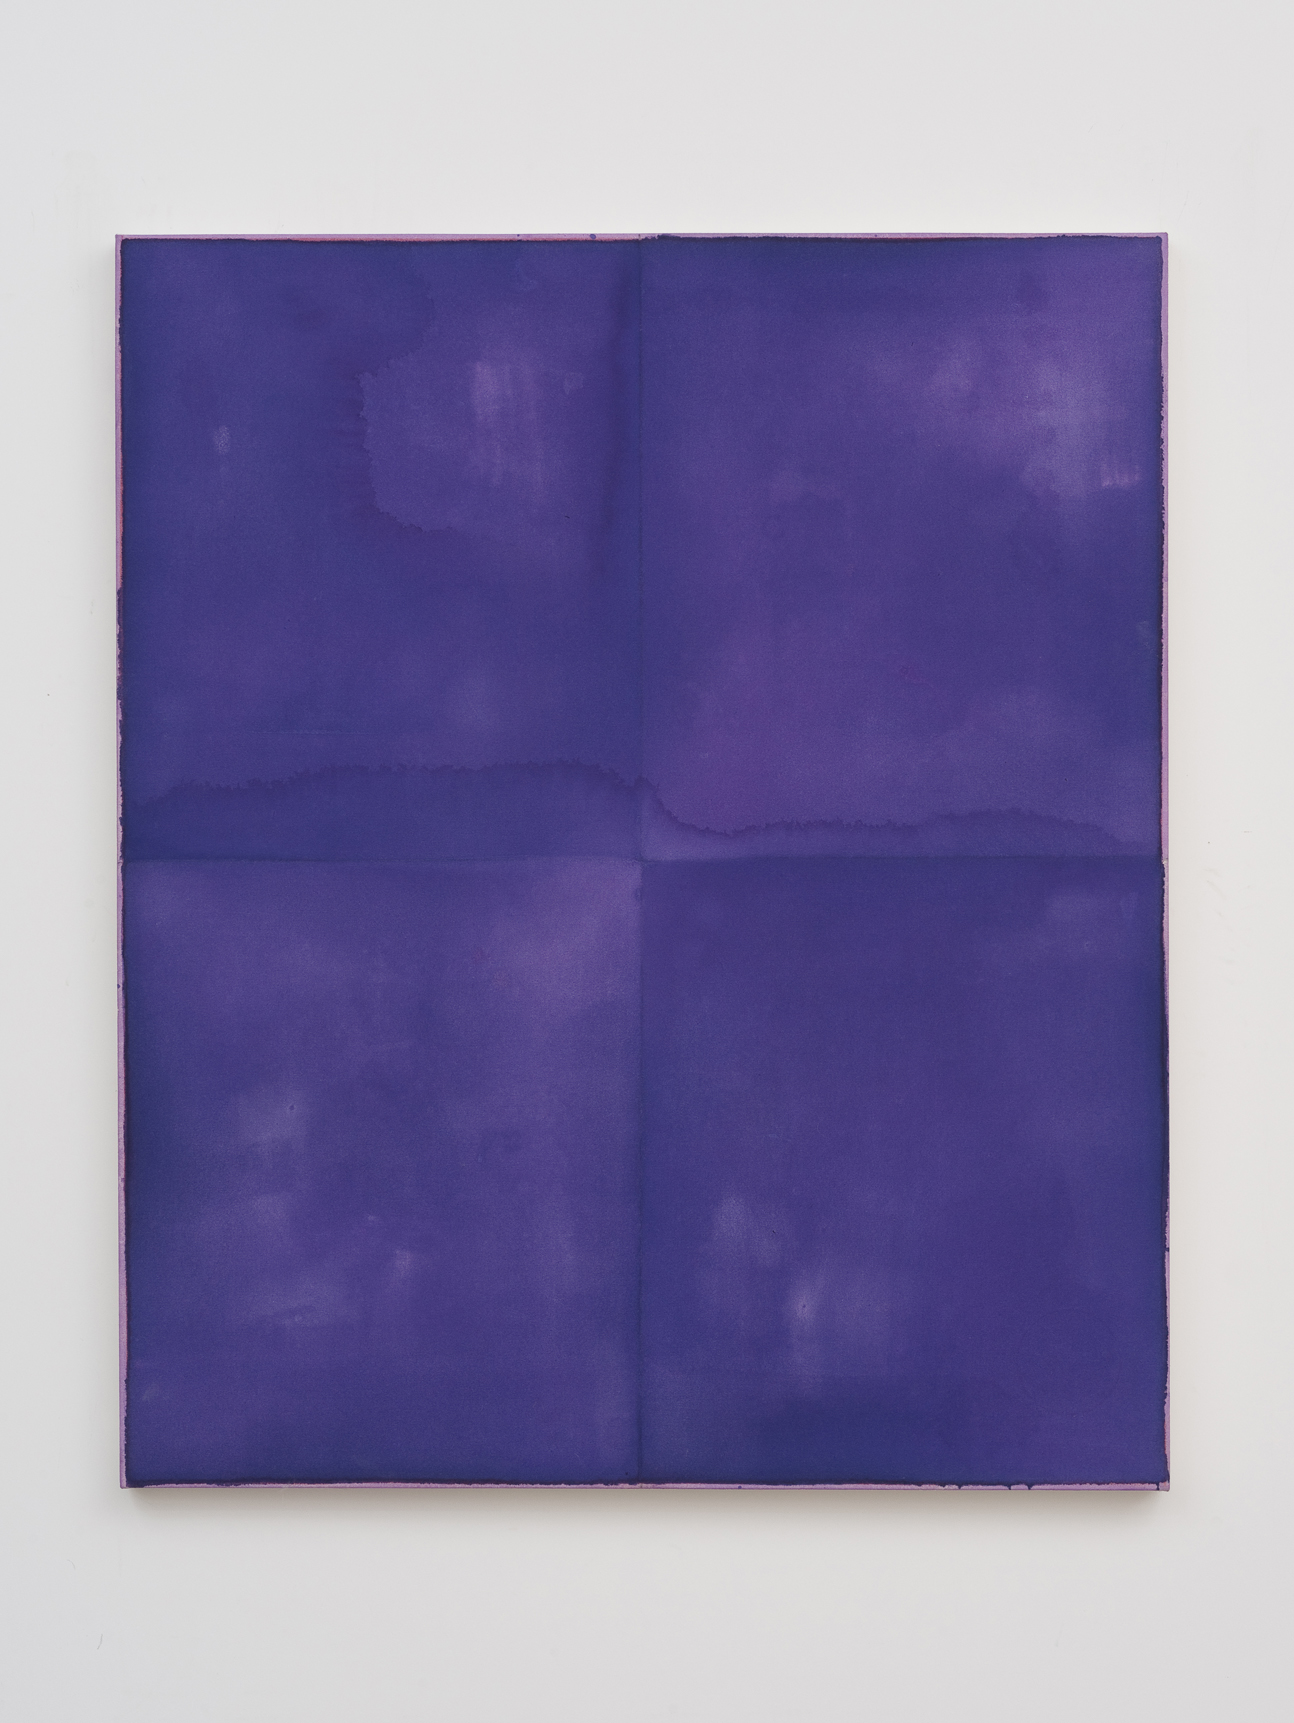      Violet Example   Monochrome / individually treated quadrants   2013   Acrylic and pencil on canvas:&nbsp;  127 x 106.8 cm / 50 x 42 in  